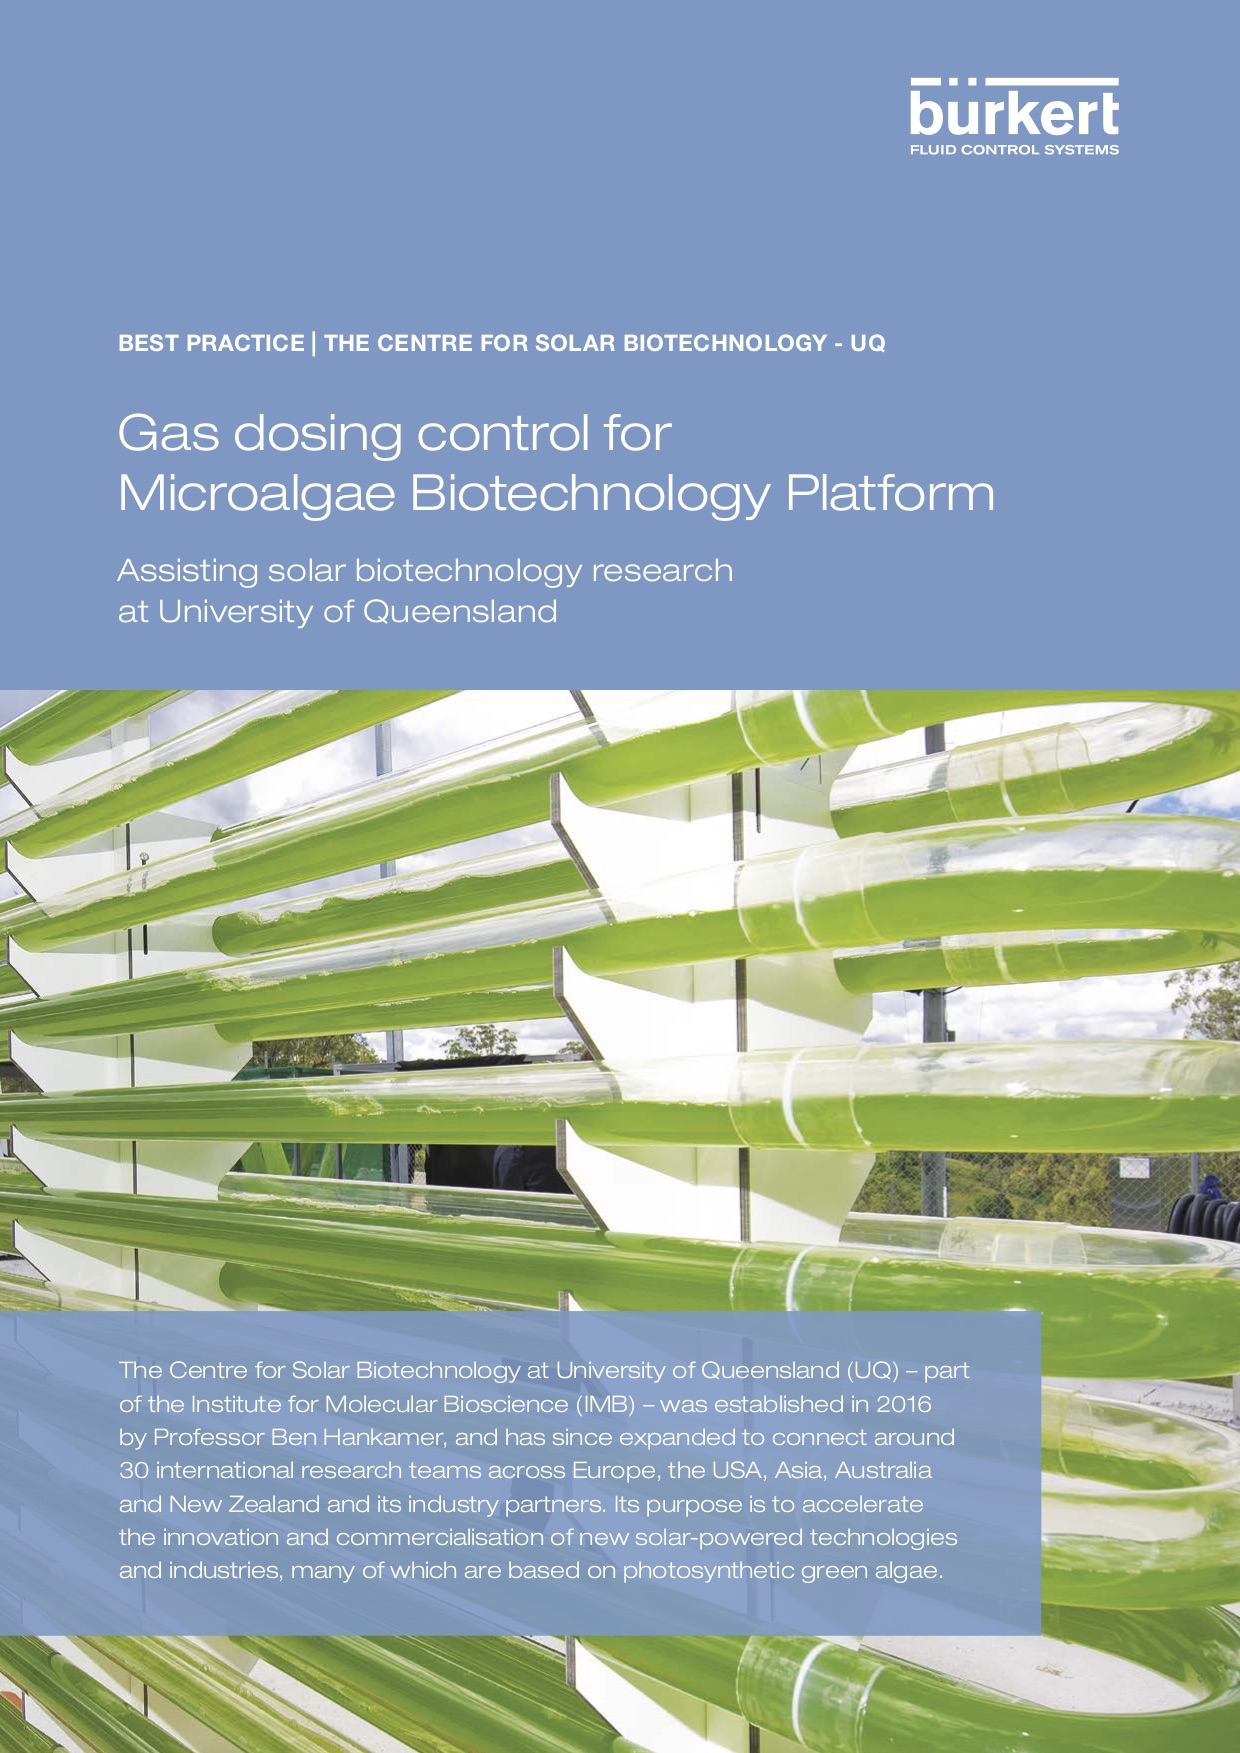 Gas dosing control for Microalgae Biotechnology Platform: Assisting solar biotechnology research at University of Queensland.